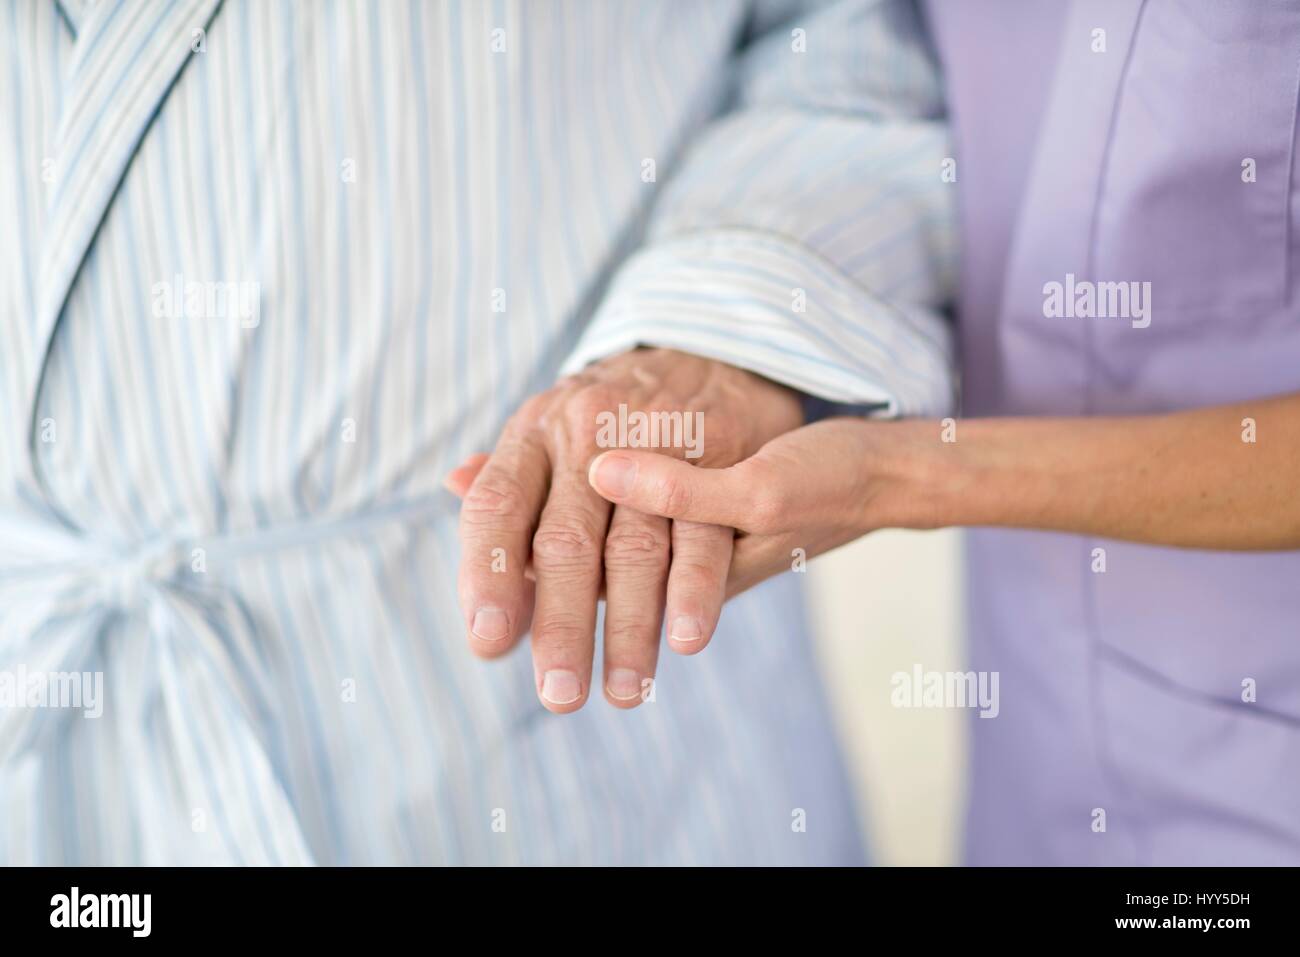 Care worker holding senior patient's hand. Stock Photo